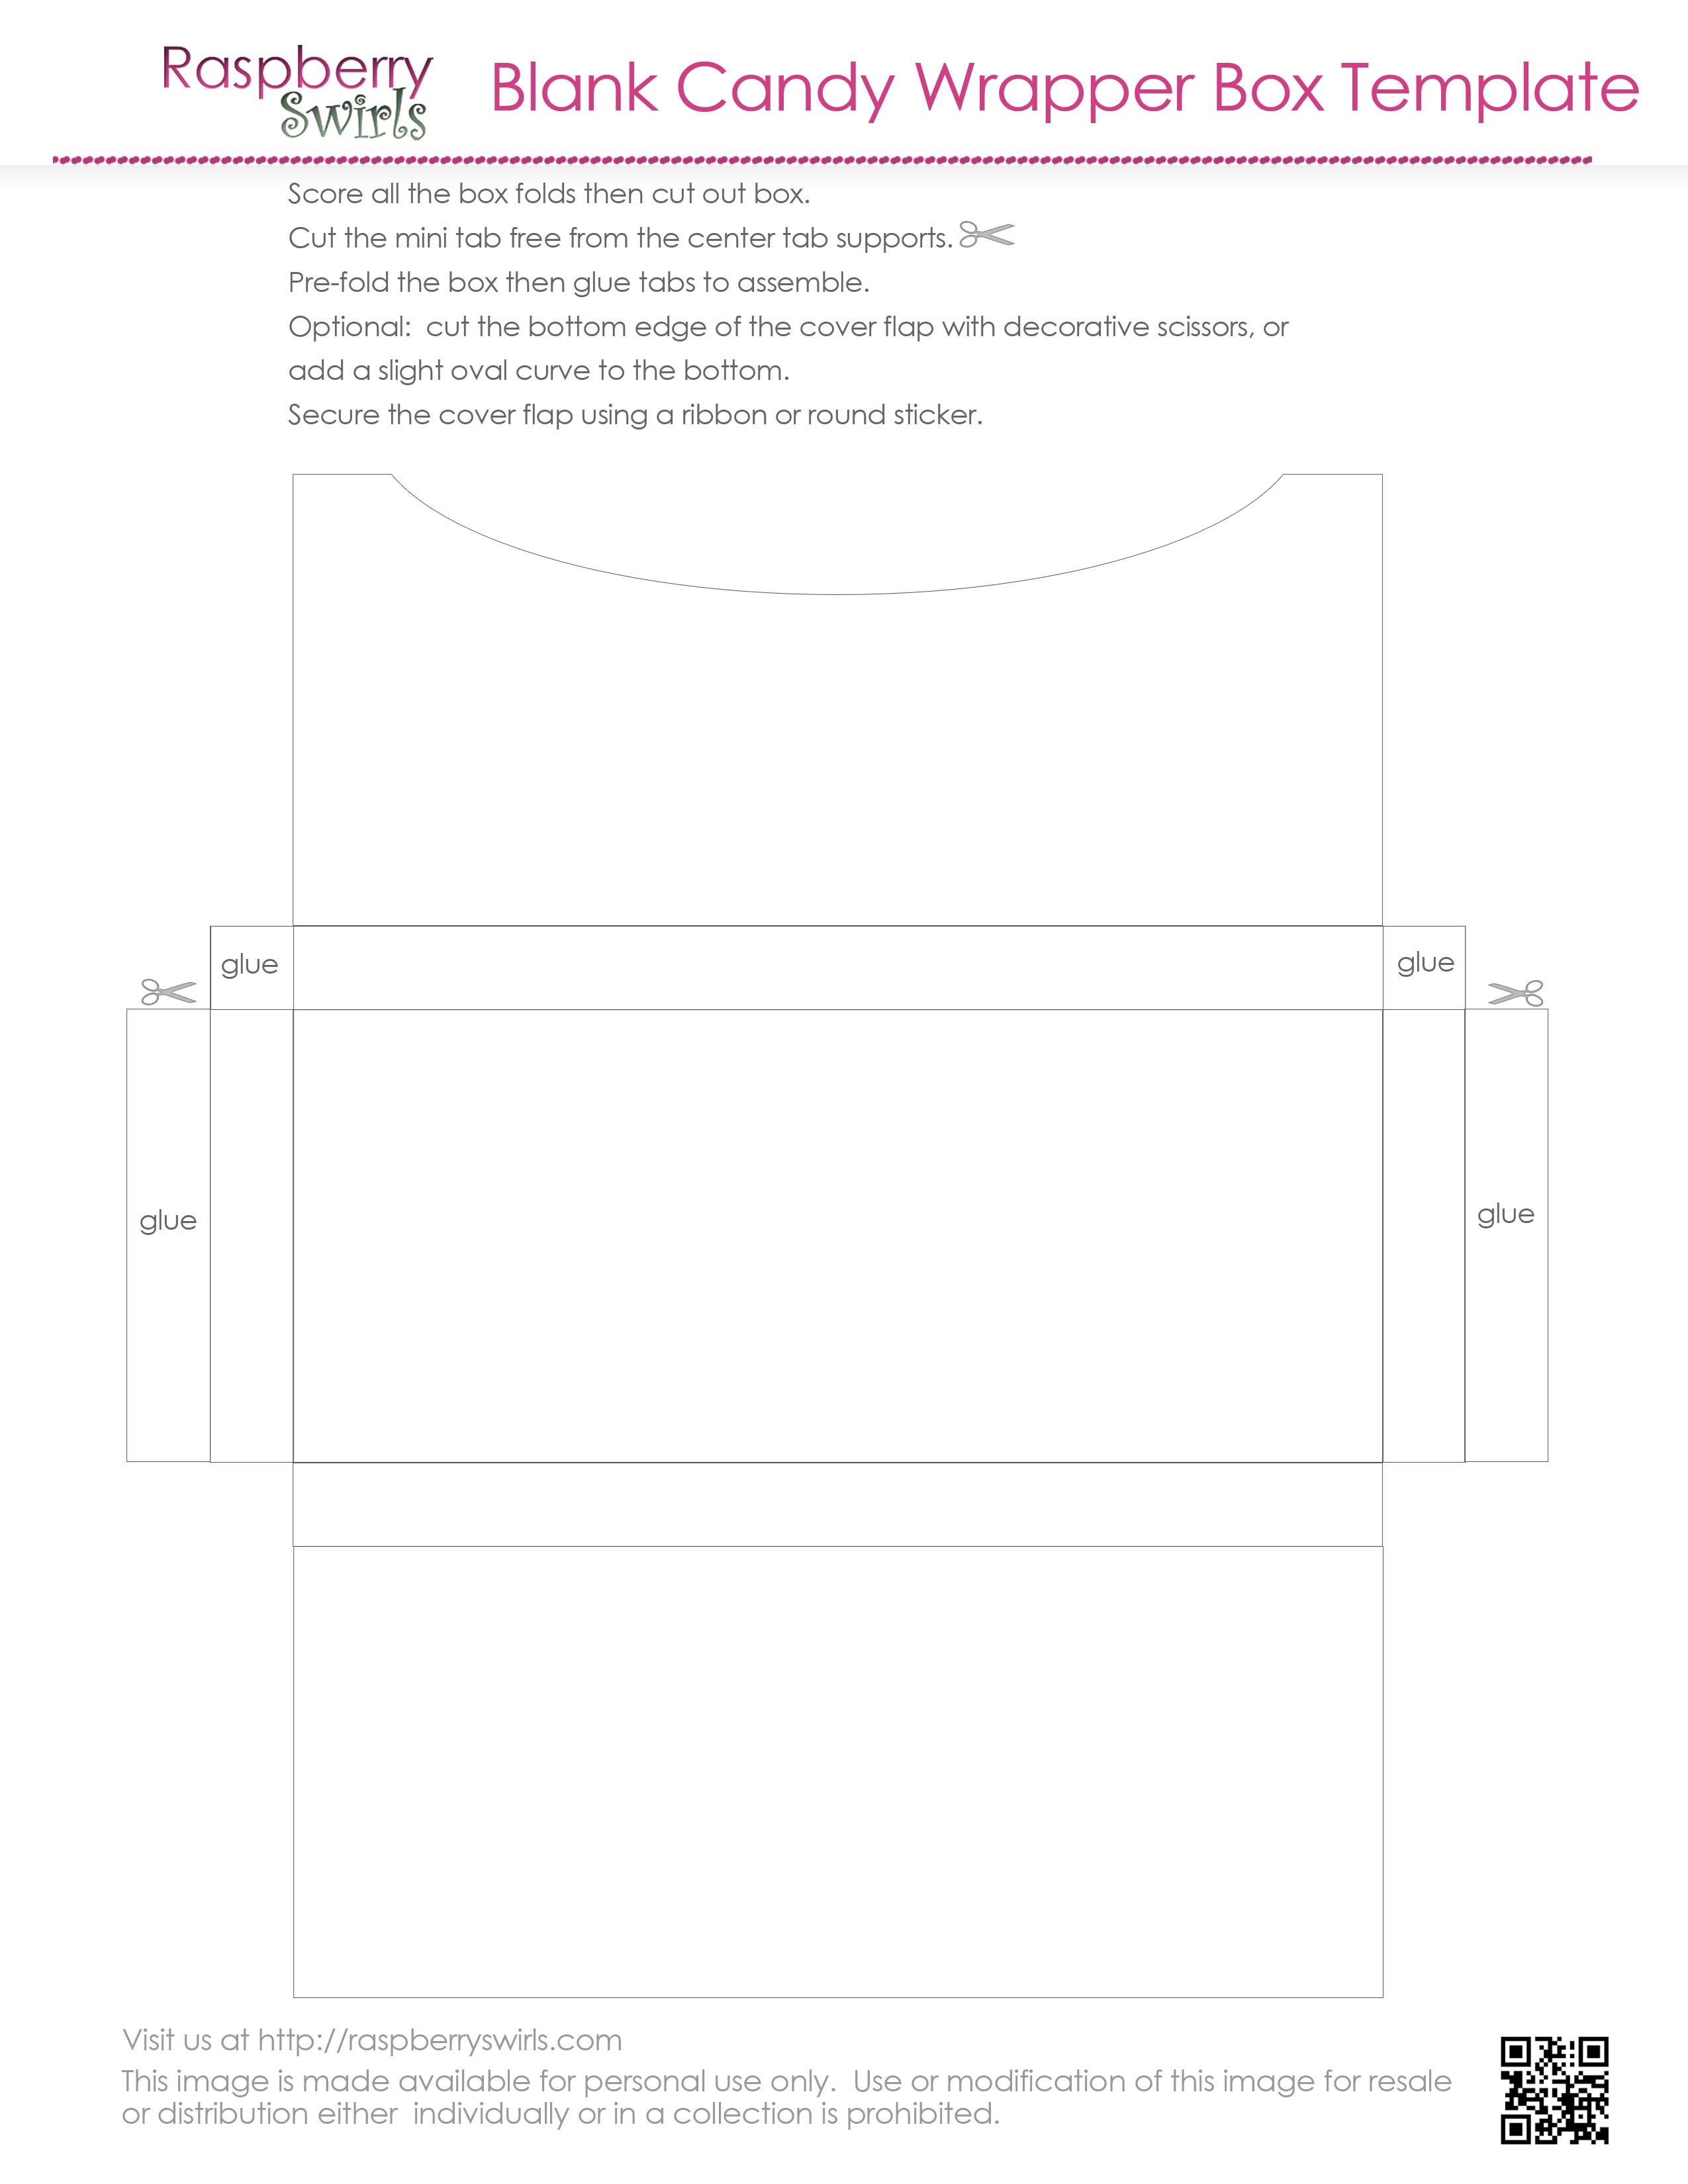 template-printable-images-gallery-category-page-60-printablee